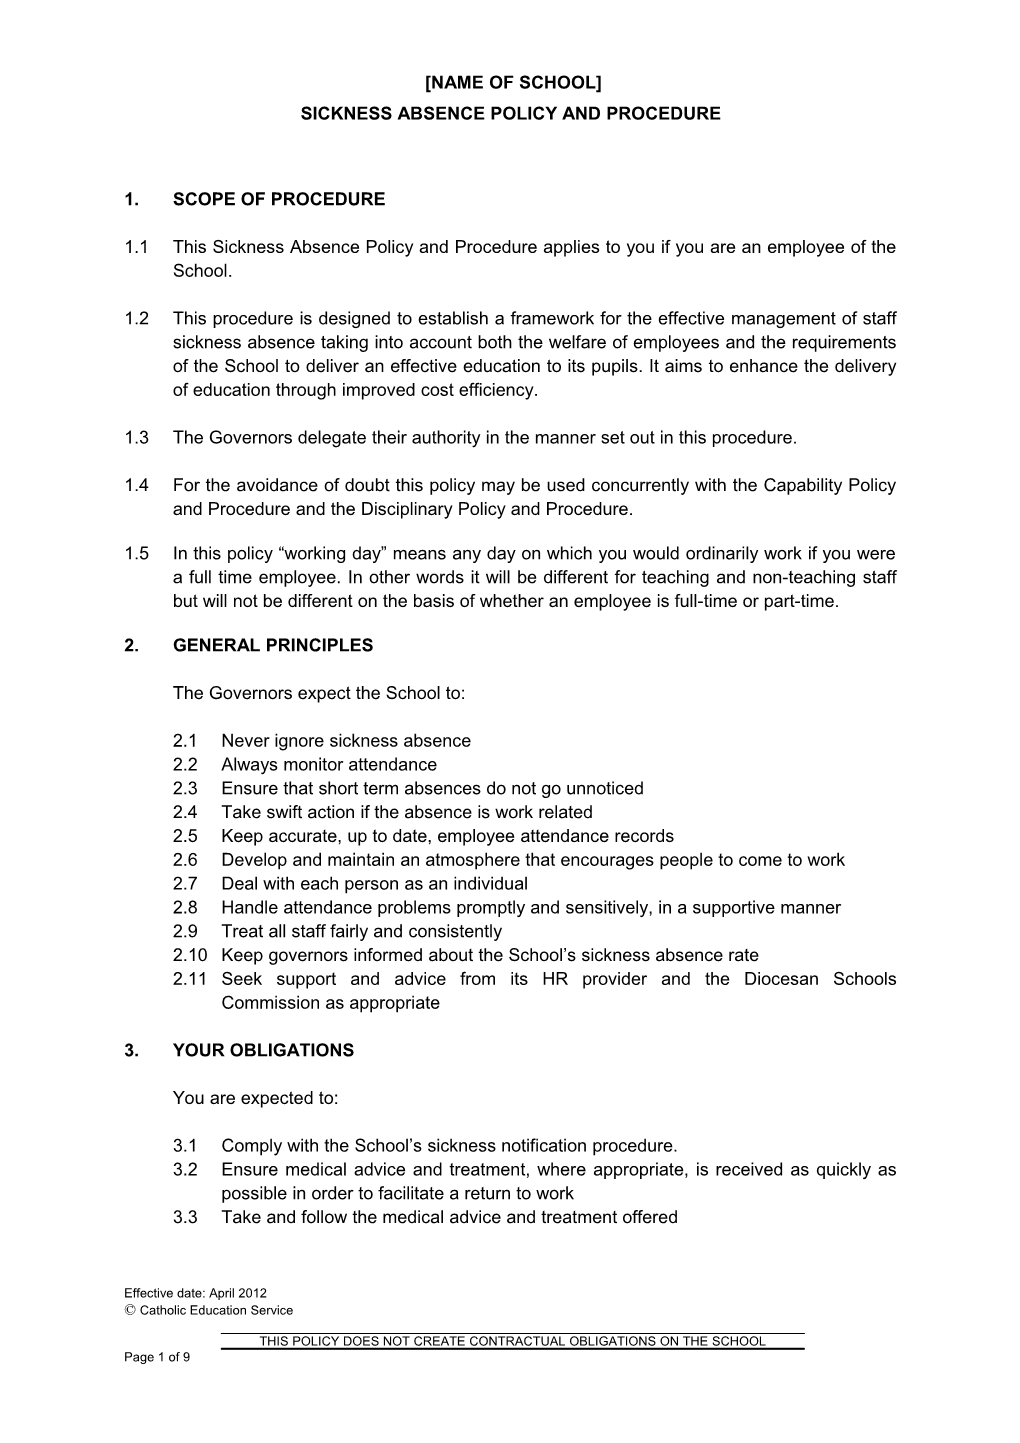 April 2012 Sickness Absence Policy and Procedure